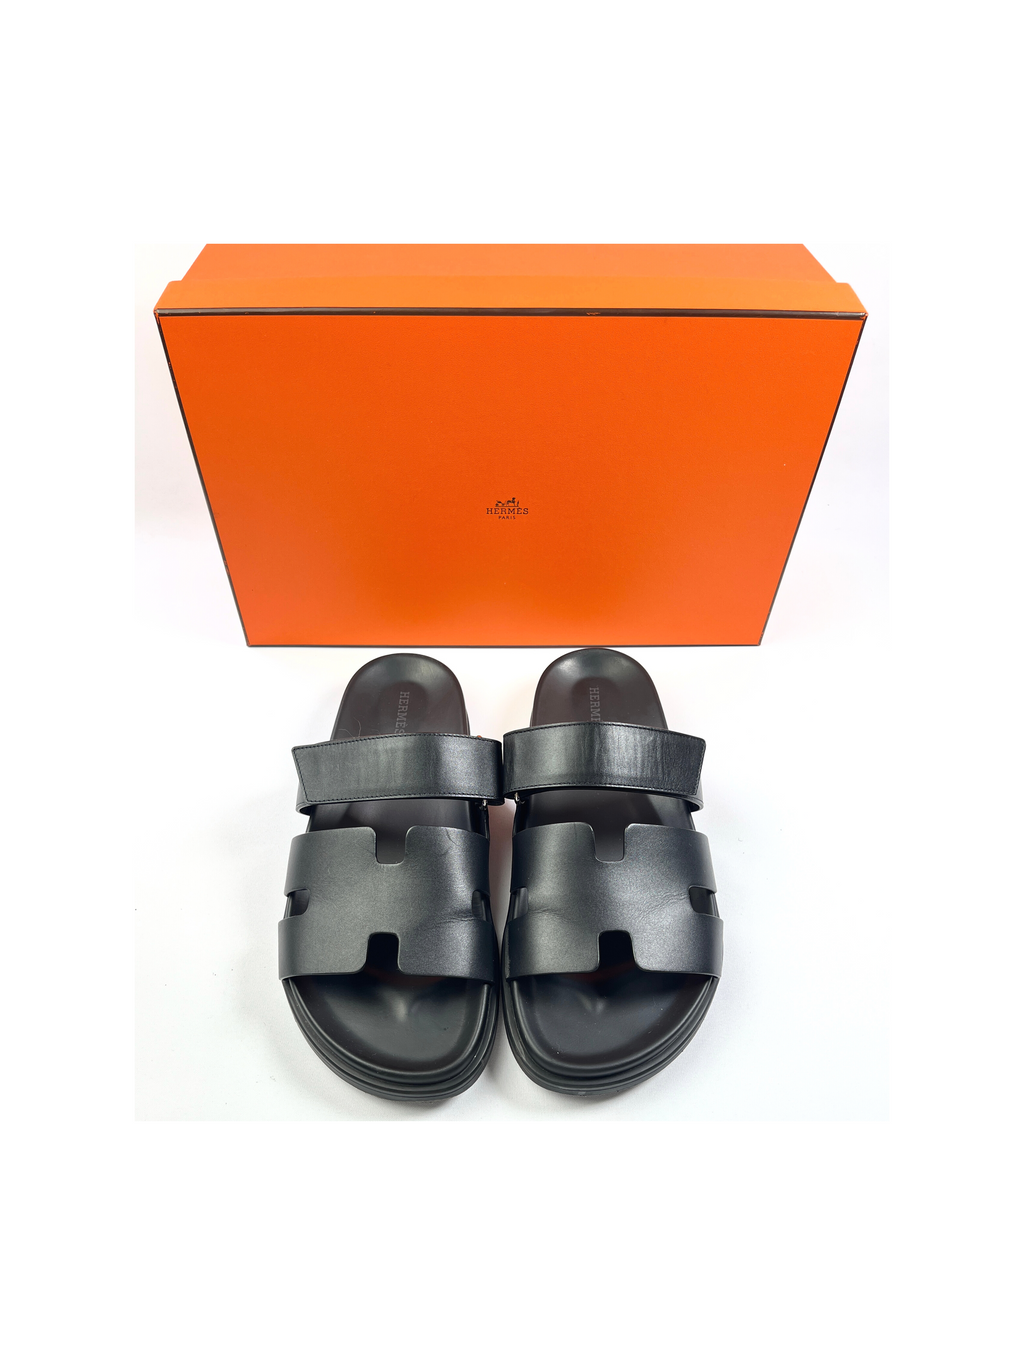 HERMES - CHYPRE LEATHER SANDALS IN BLACK (MENS) - SZ 41